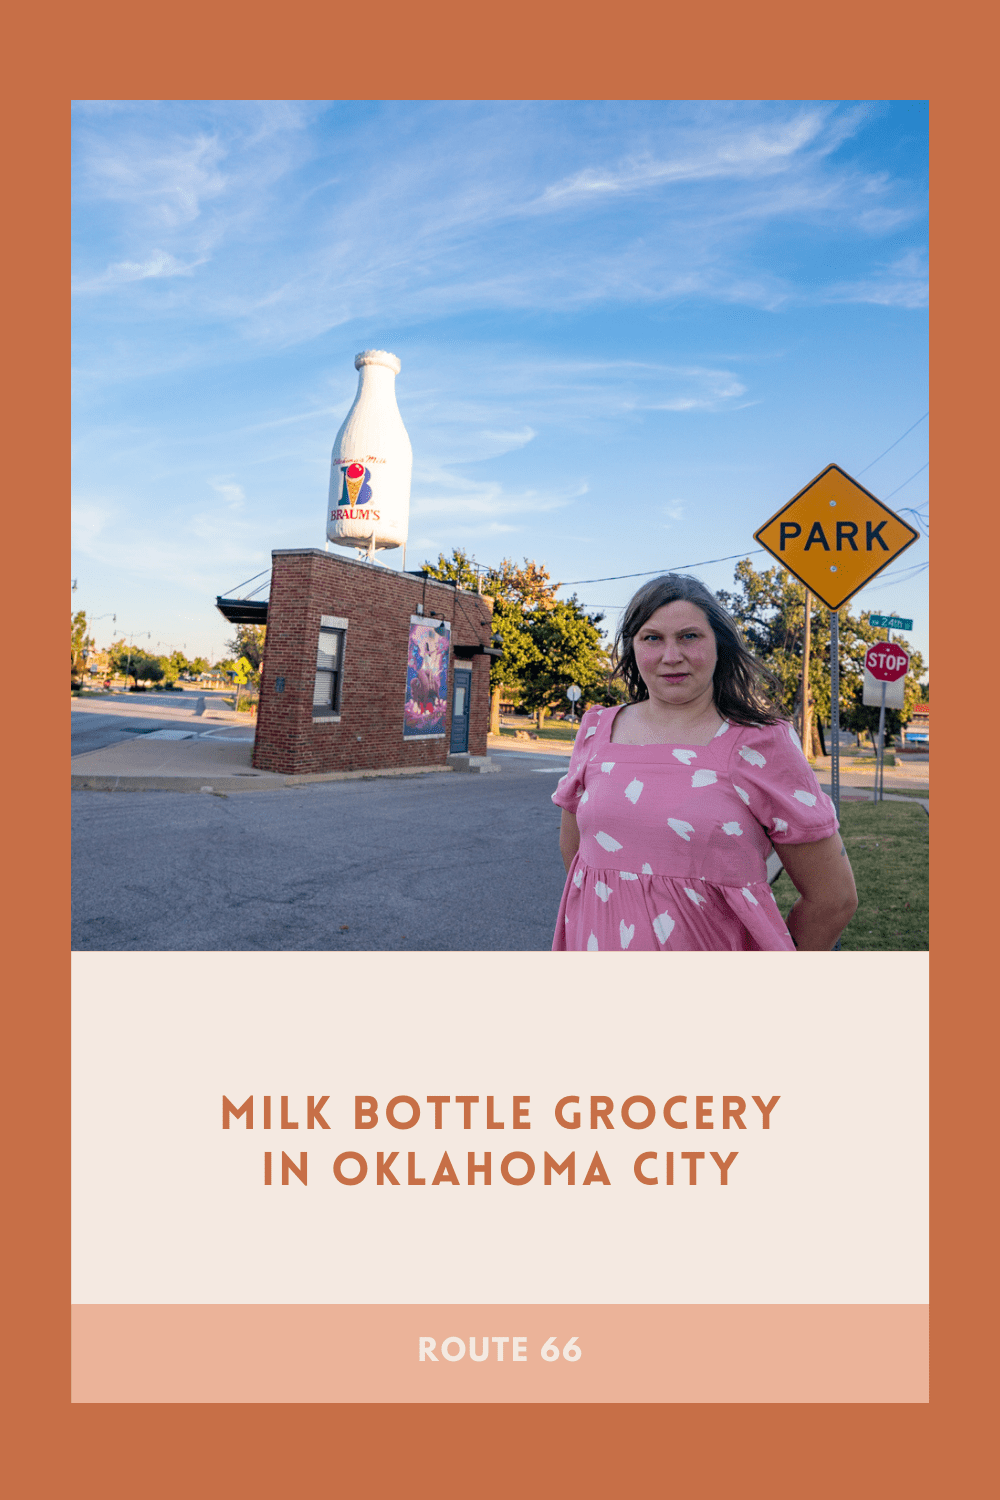 Got milk? Don’t worry, I know somewhere where you might never run out. Here at the milk bottle grocery in Oklahoma City, Oklahoma. Don't miss this Route 66 roadside attraction on your Mother Road road trip.  #Route66 #Route66RoadTrip #OklahomaRoadsideAttractions #OklahomaRoadsideAttraction #RoadsideAttractions #RoadsideAttraction #RoadTrip #OklahomaRoadTrip #OklahomaRoadTripBucketLists #OklahomaBucketList #OklahomaRoadTripThingstoDo #OklahomaRoadTripIdeas